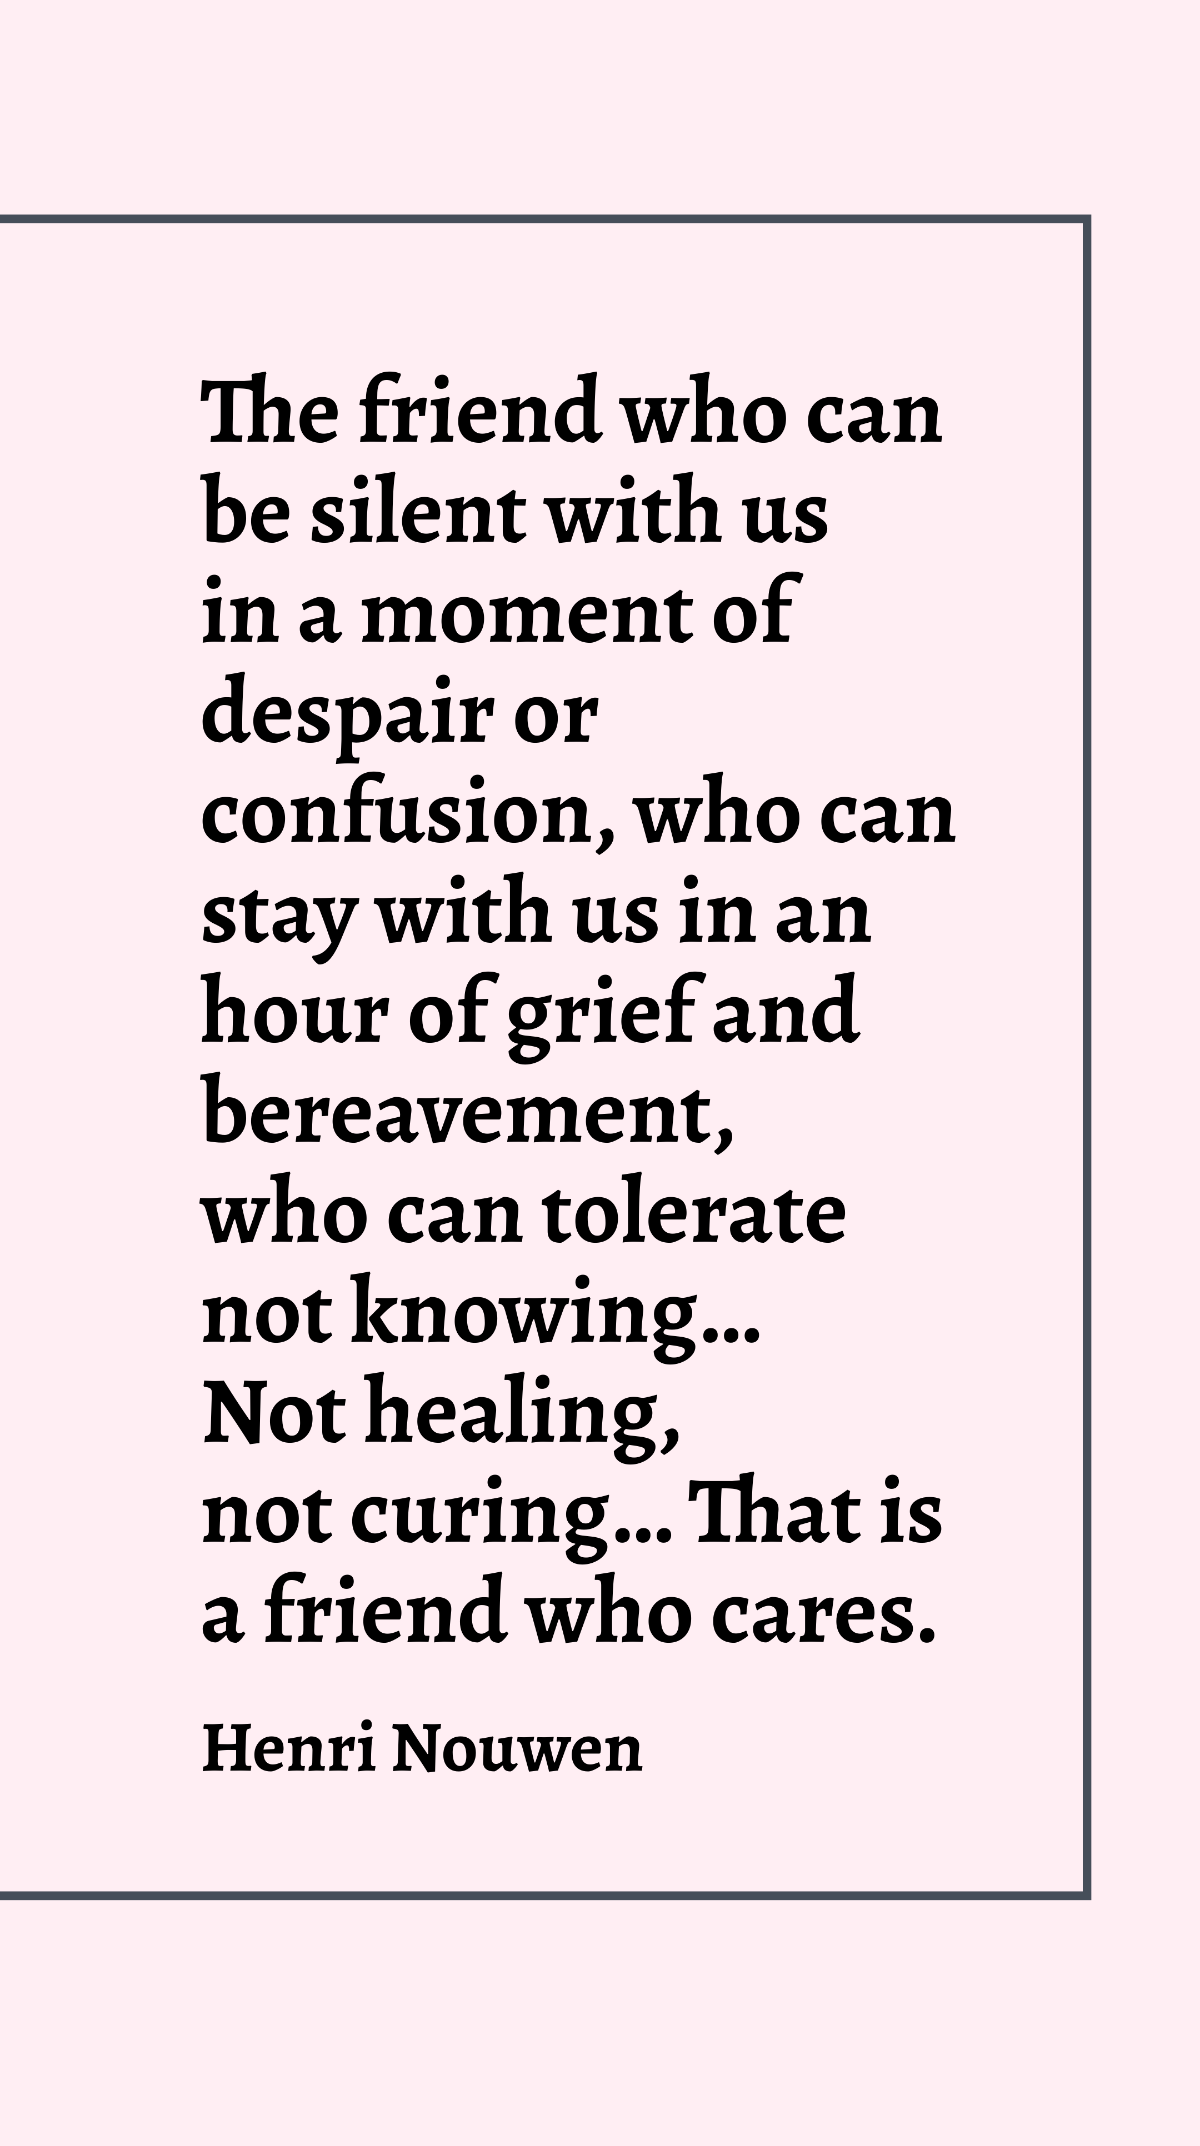 Henri Nouwen - The friend who can be silent with us in a moment of despair or confusion, who can stay with us in an hour of grief and bereavement, who can tolerate not knowing…not healing, not curing…